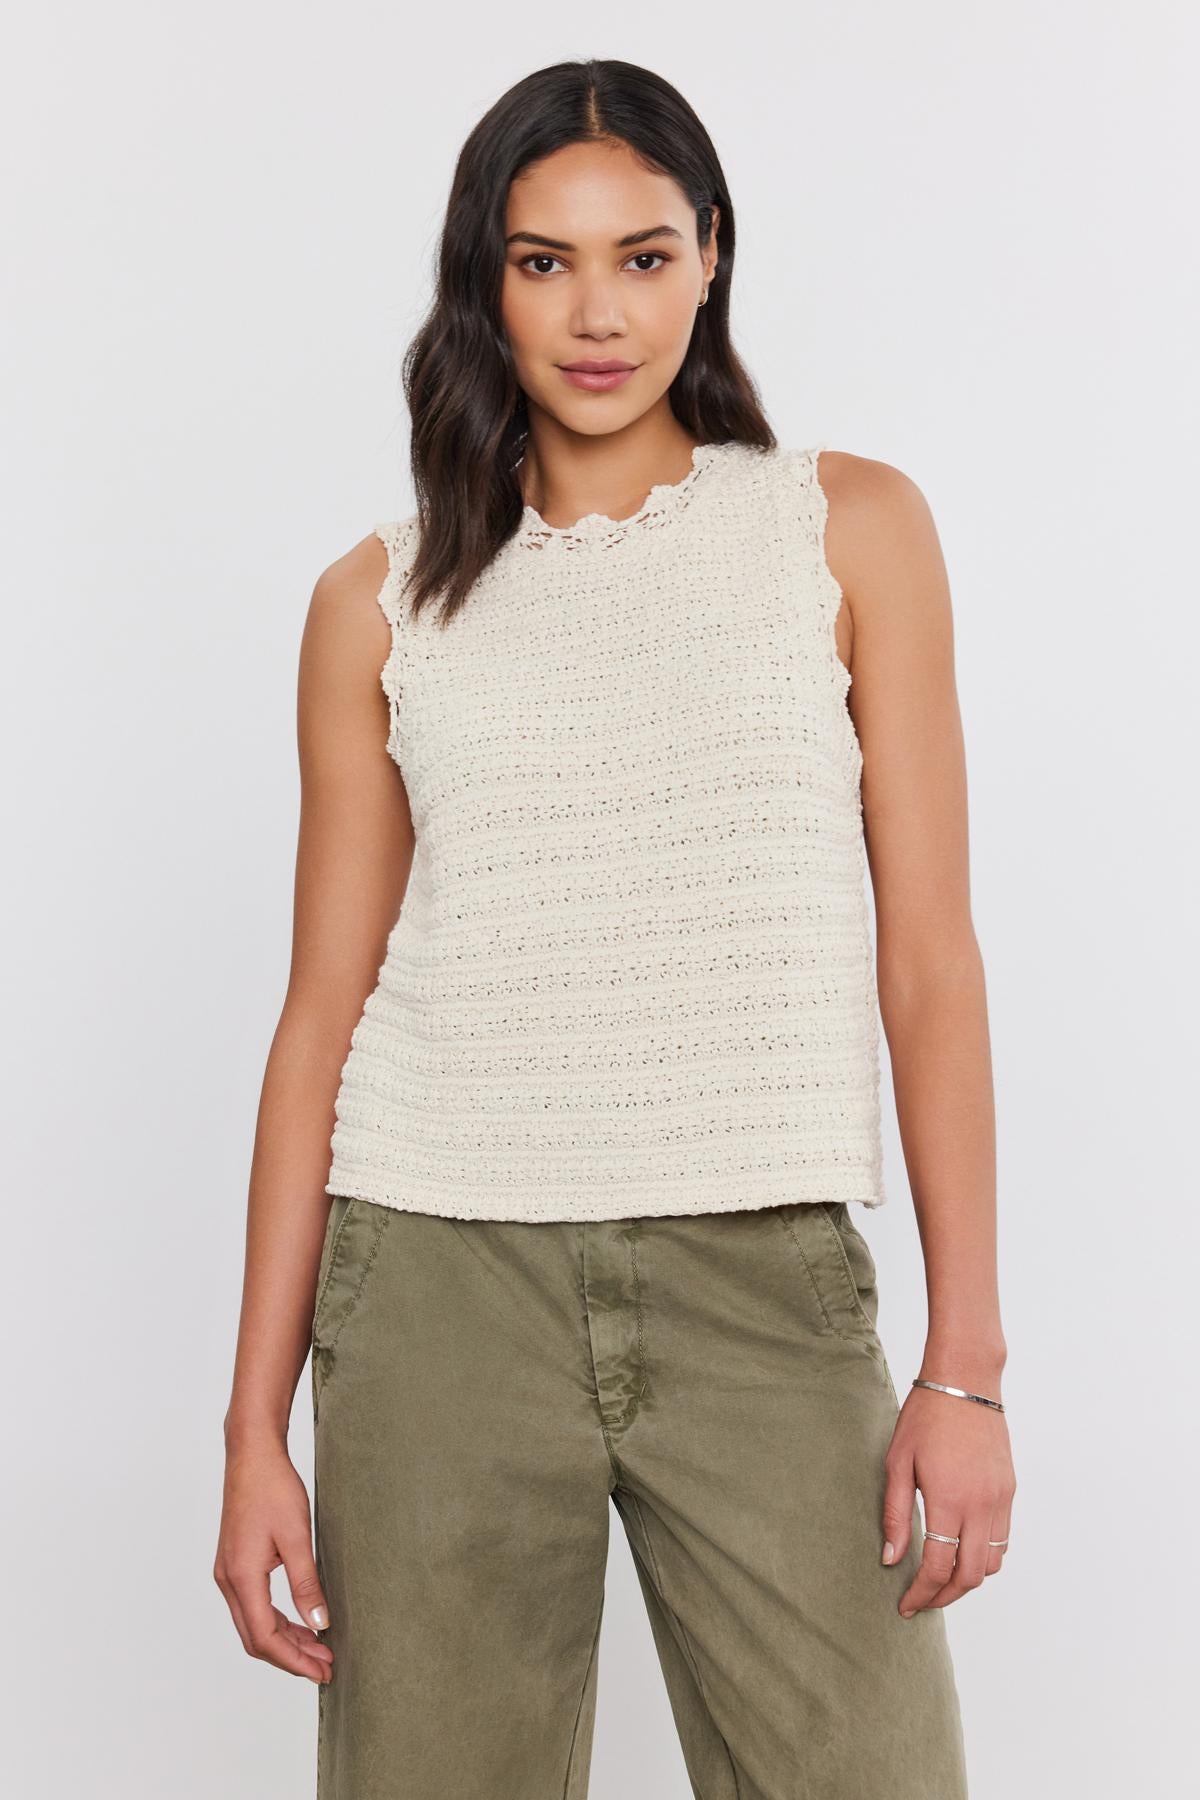   A person stands against a plain background wearing a sleeveless, cream-colored Velvet by Graham & Spencer SOPHIE SWEATER VEST with scallop details and green pants. 